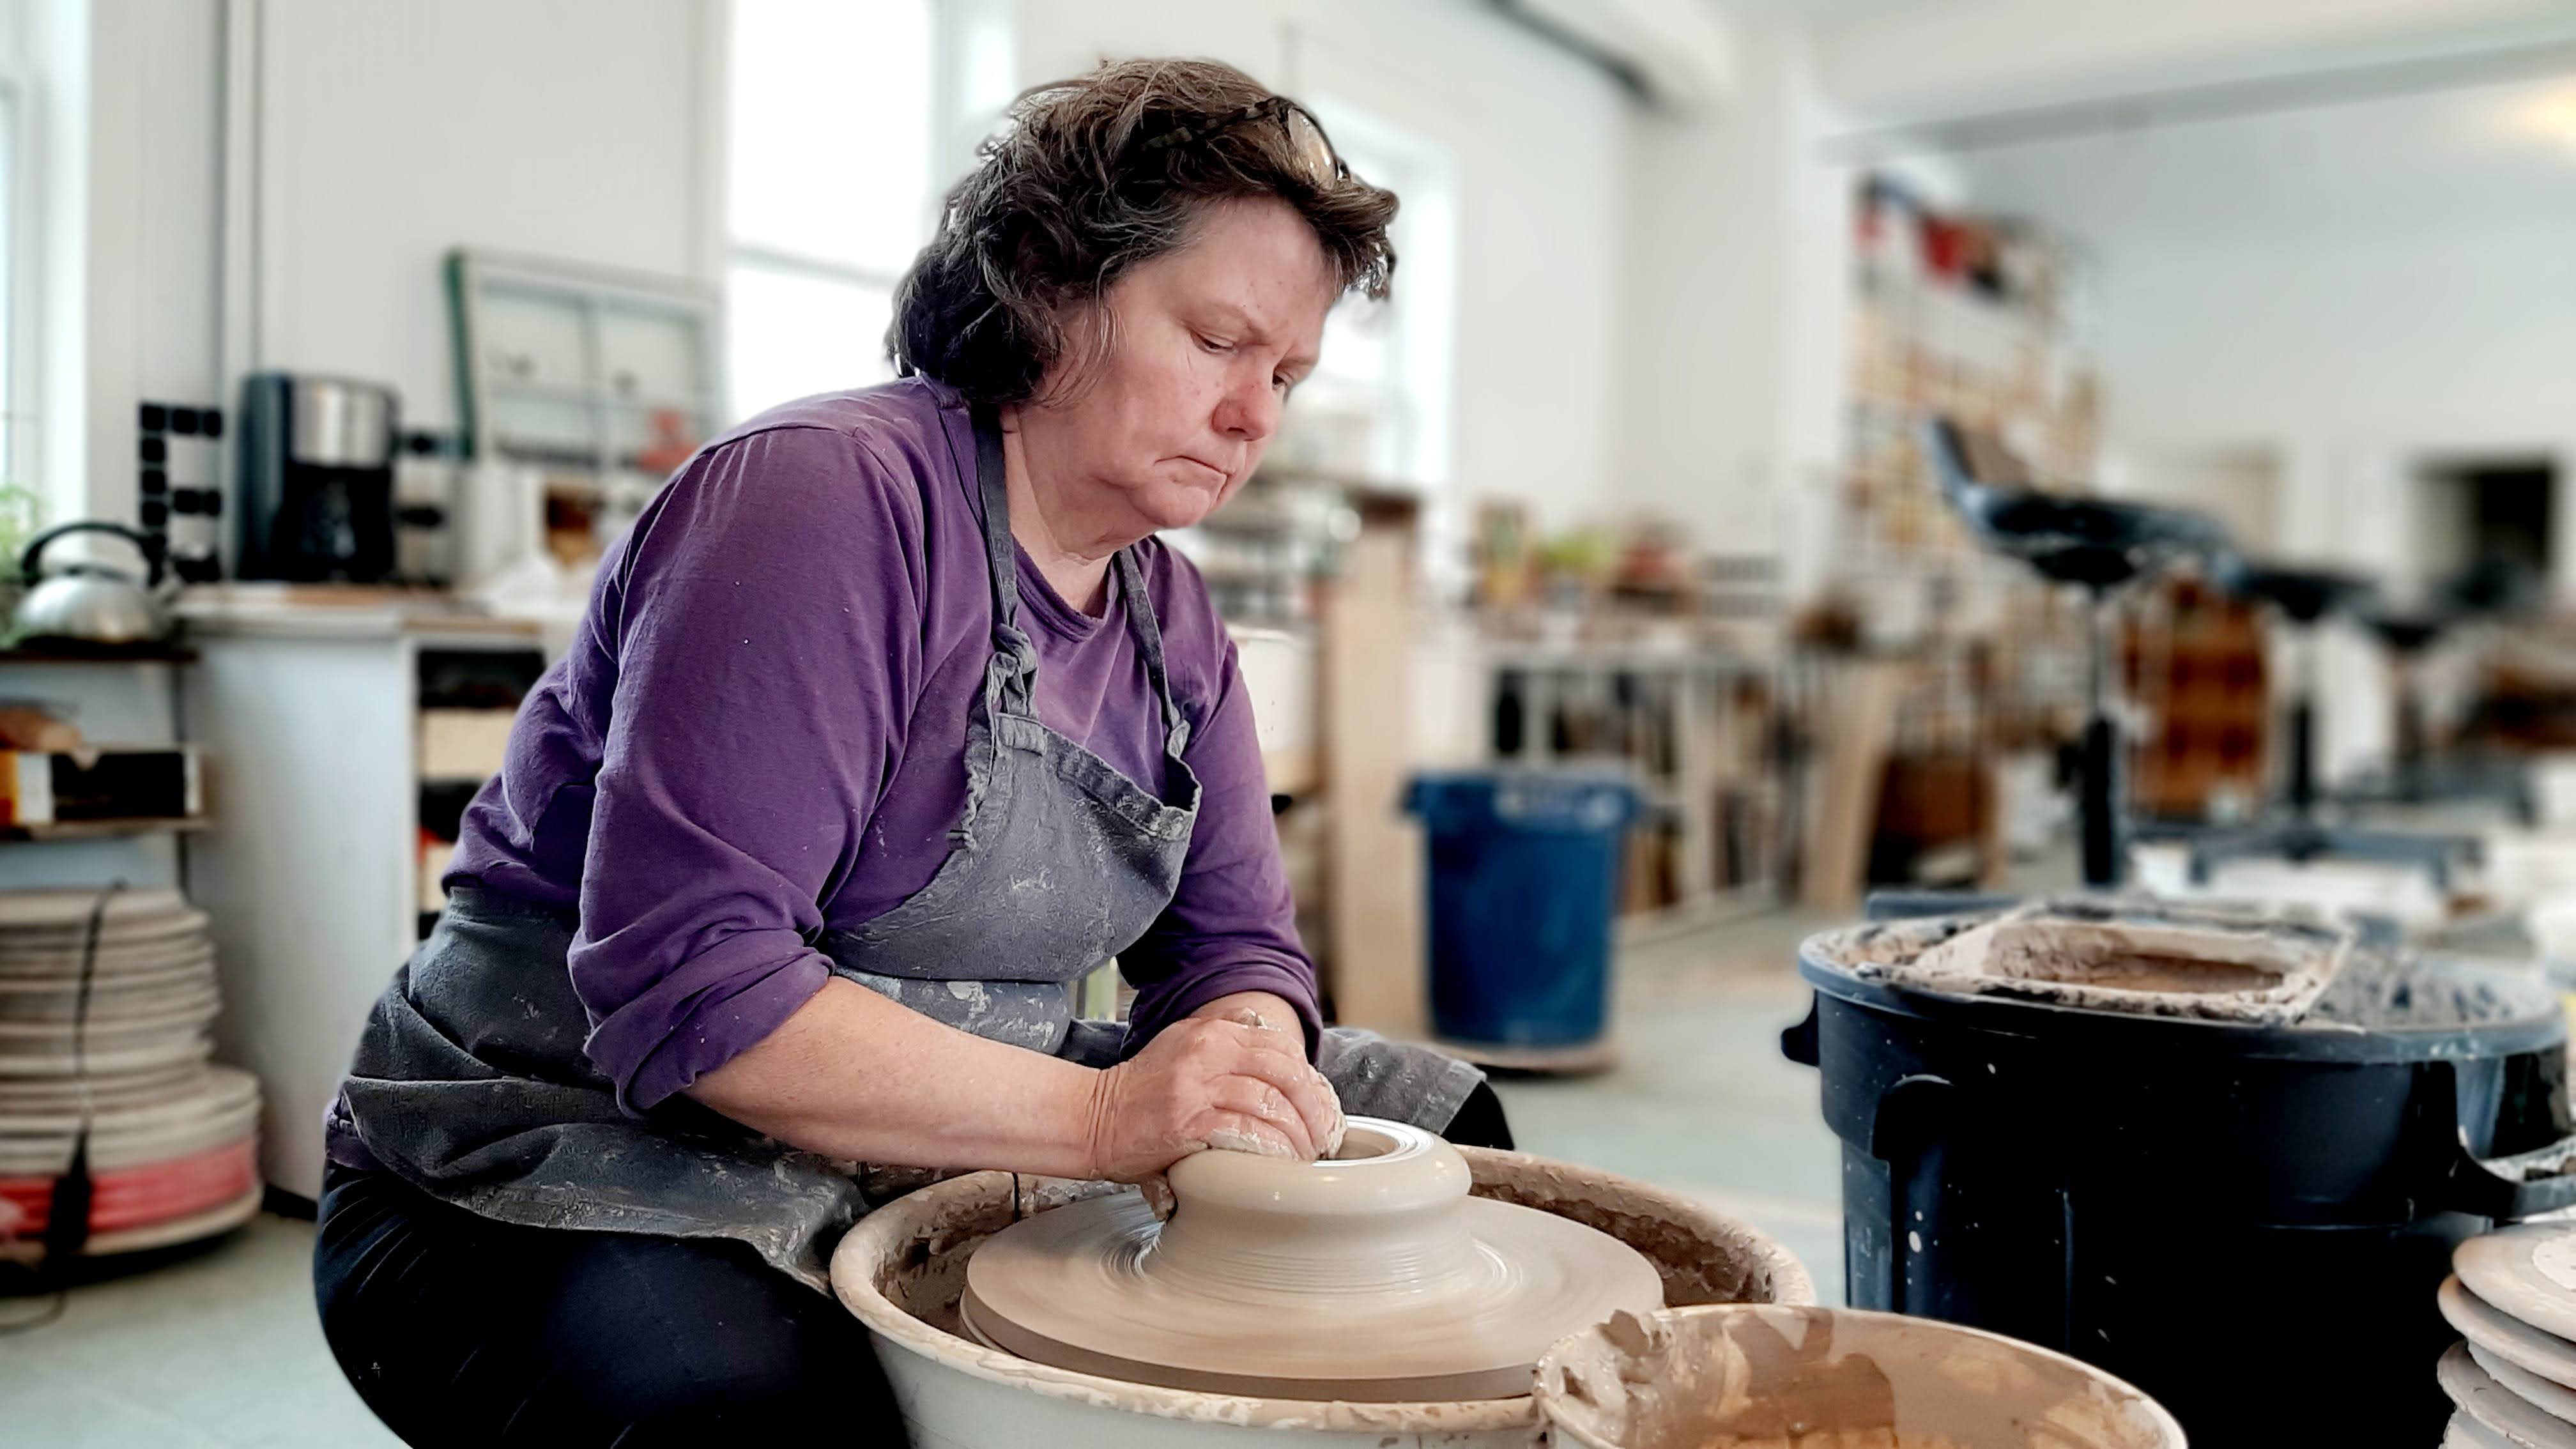 Potter Rosemary Arthurs in her New Dundee studio, where she created work that will be showcased at an artisan market in TheMuseum. (Photo Nigel Gordijk)